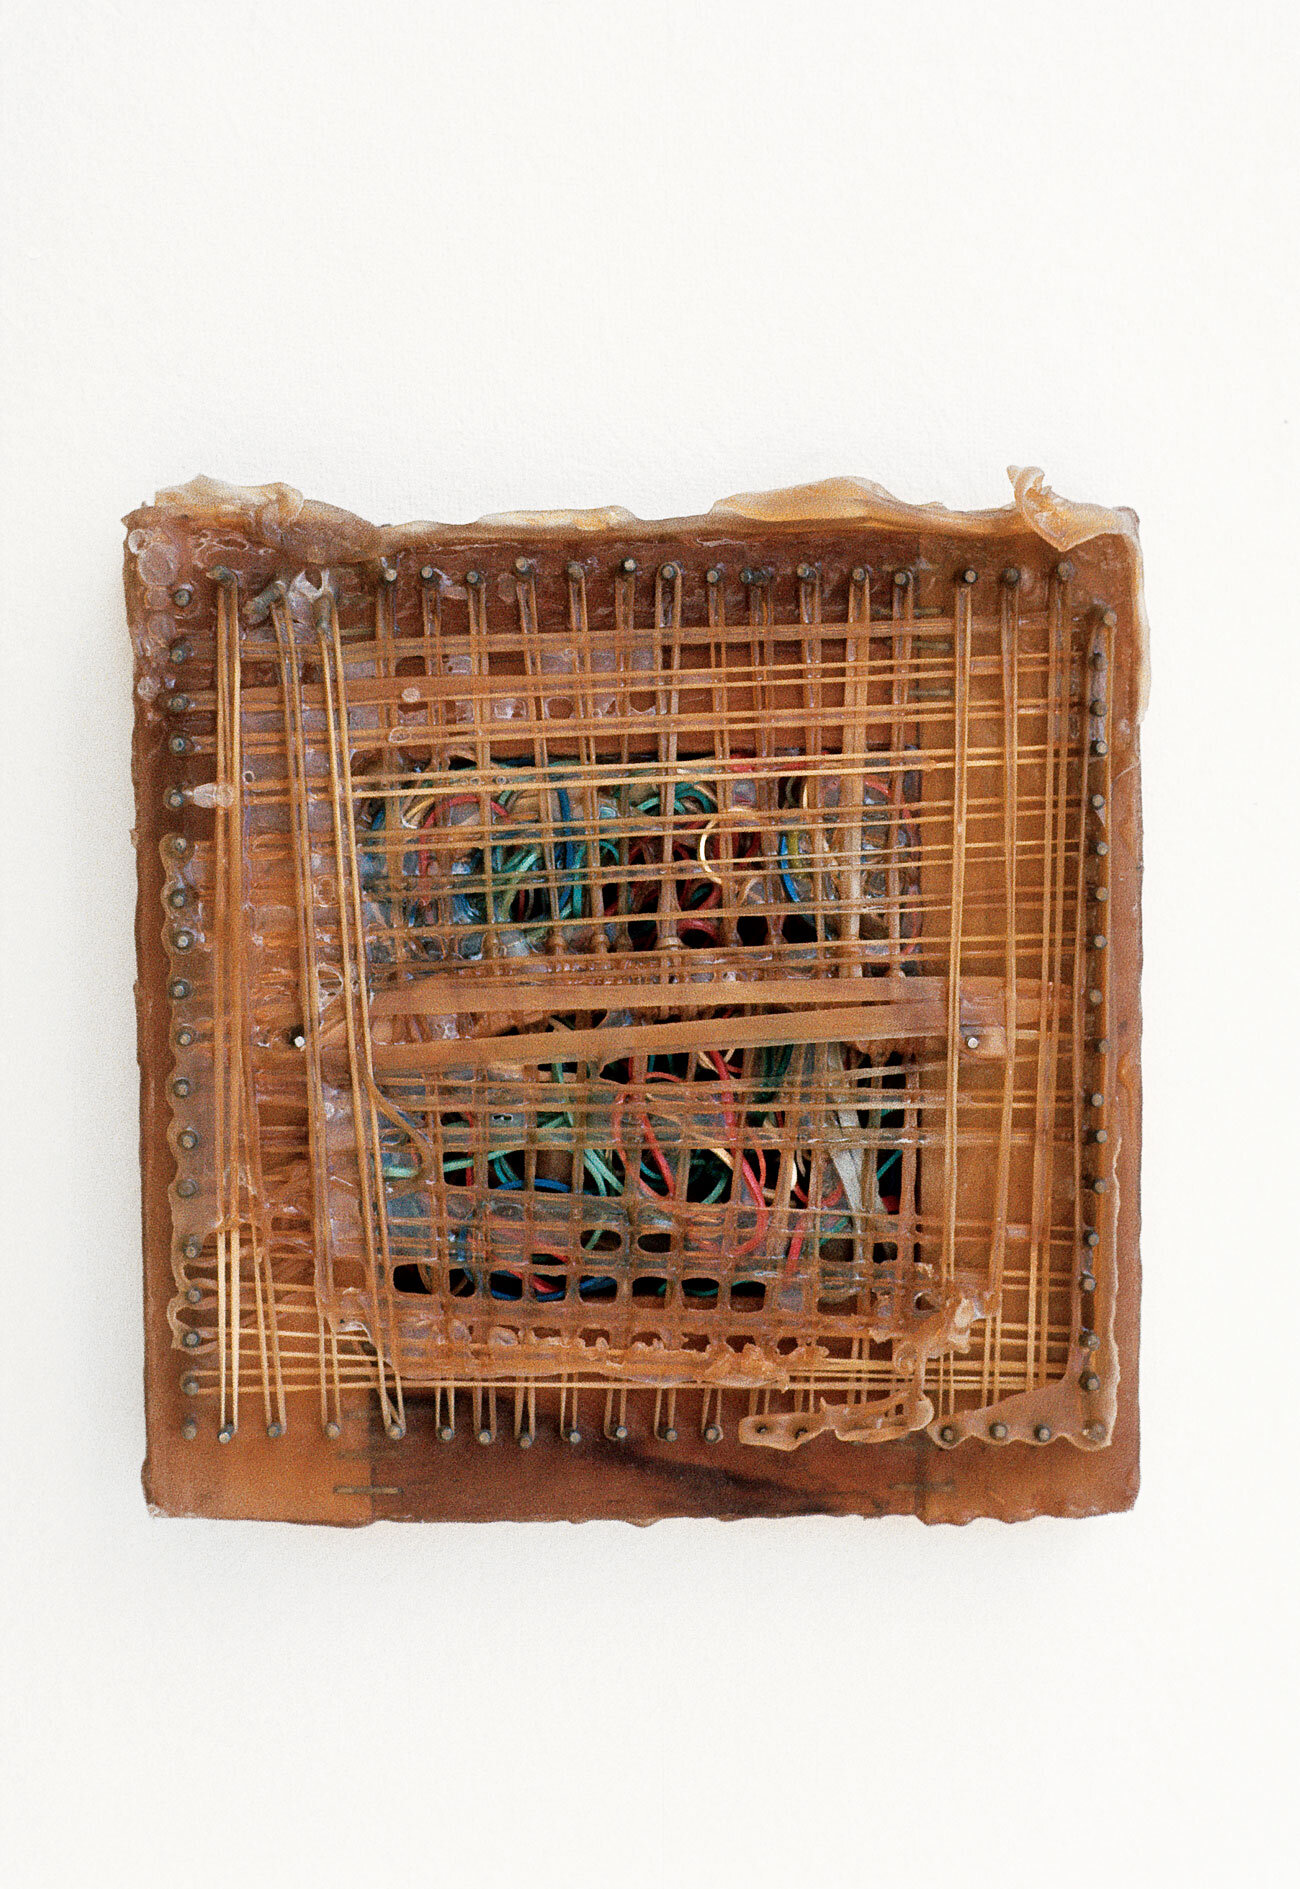   Rubber Band Glue Factory,  1970, rubber latex, rubber bands, wood, staples, 8 x 8 x 1 inches 